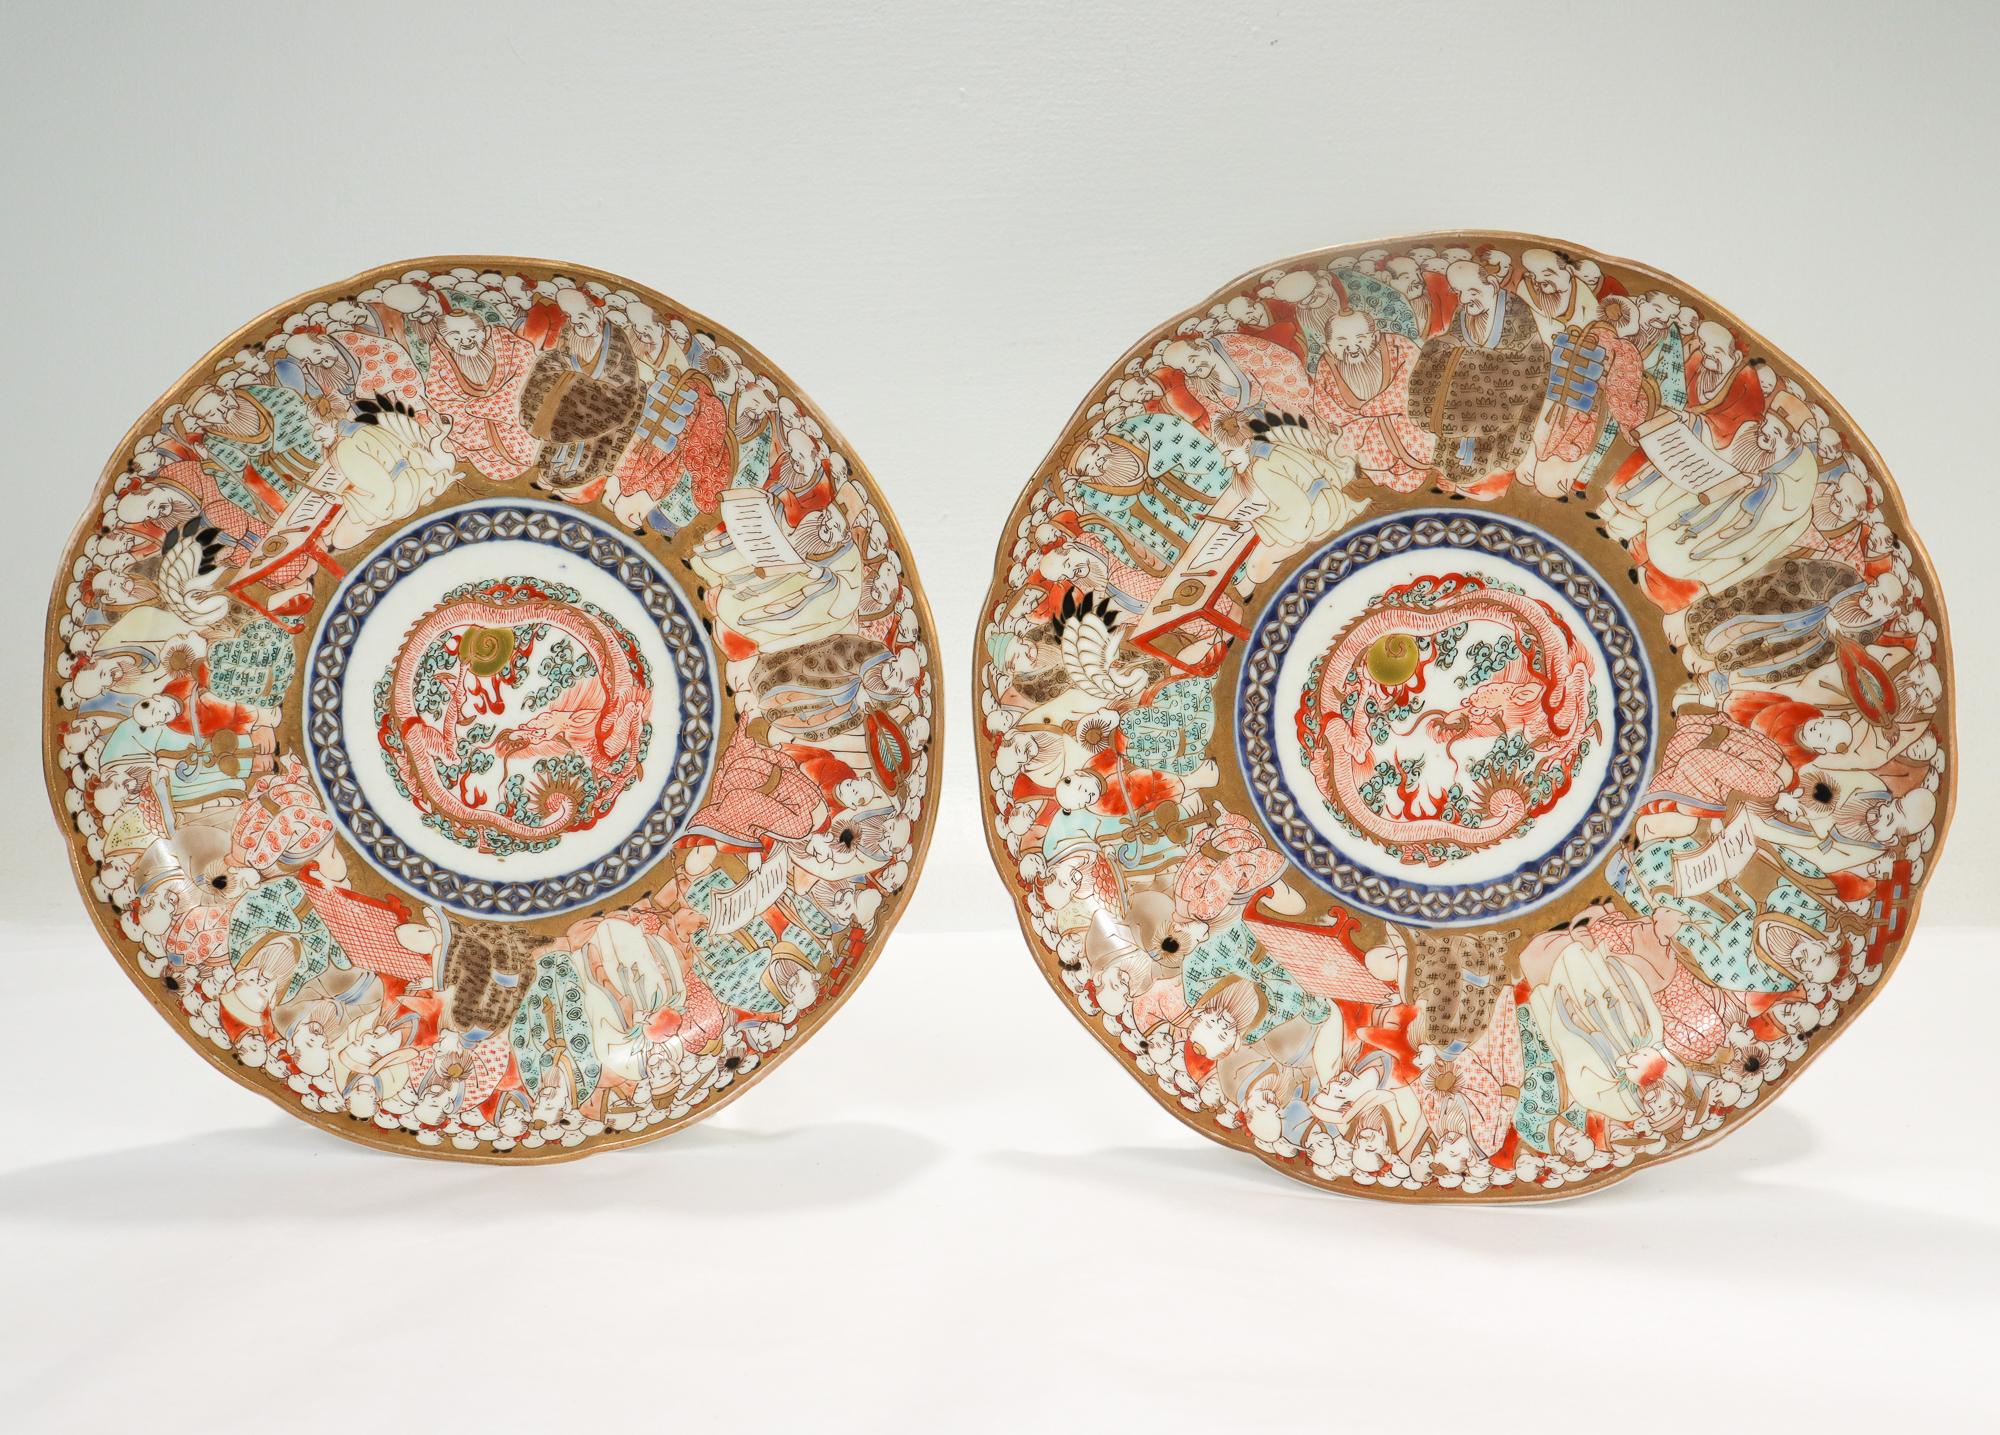 A pair of fine Japanese Imari porcelain plates.

The center of each plate has a depiction of a red Eastern dragon among blue clouds with gilt highlights.

The rims of the plates are decorated extensively with Japanese aristocrats in traditional